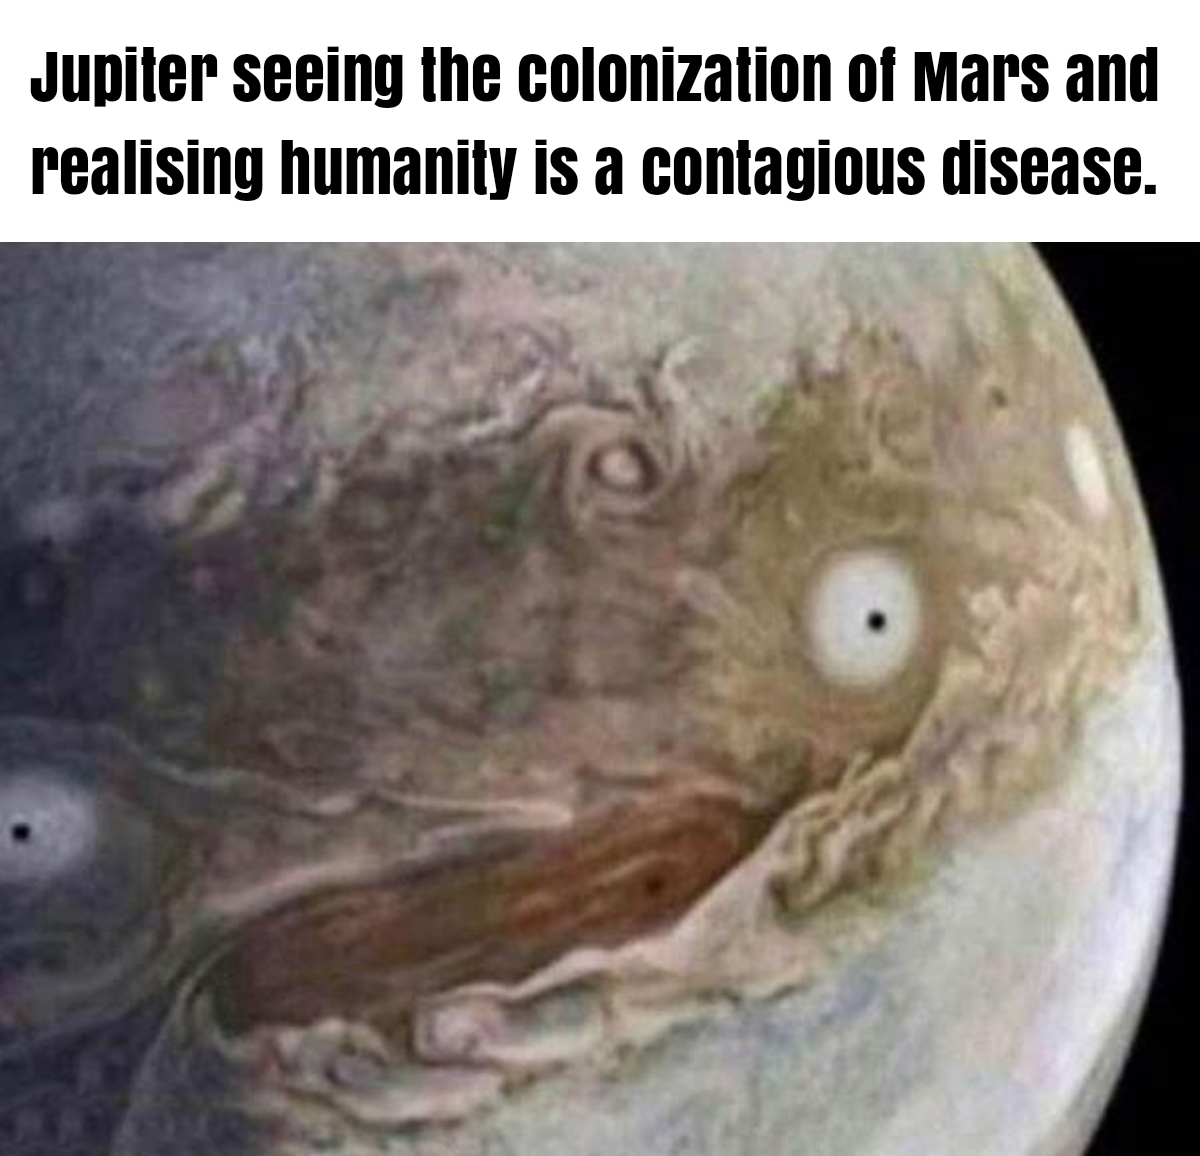 jupiter meme - Jupiter seeing the colonization of Mars and realising humanity is a contagious disease.